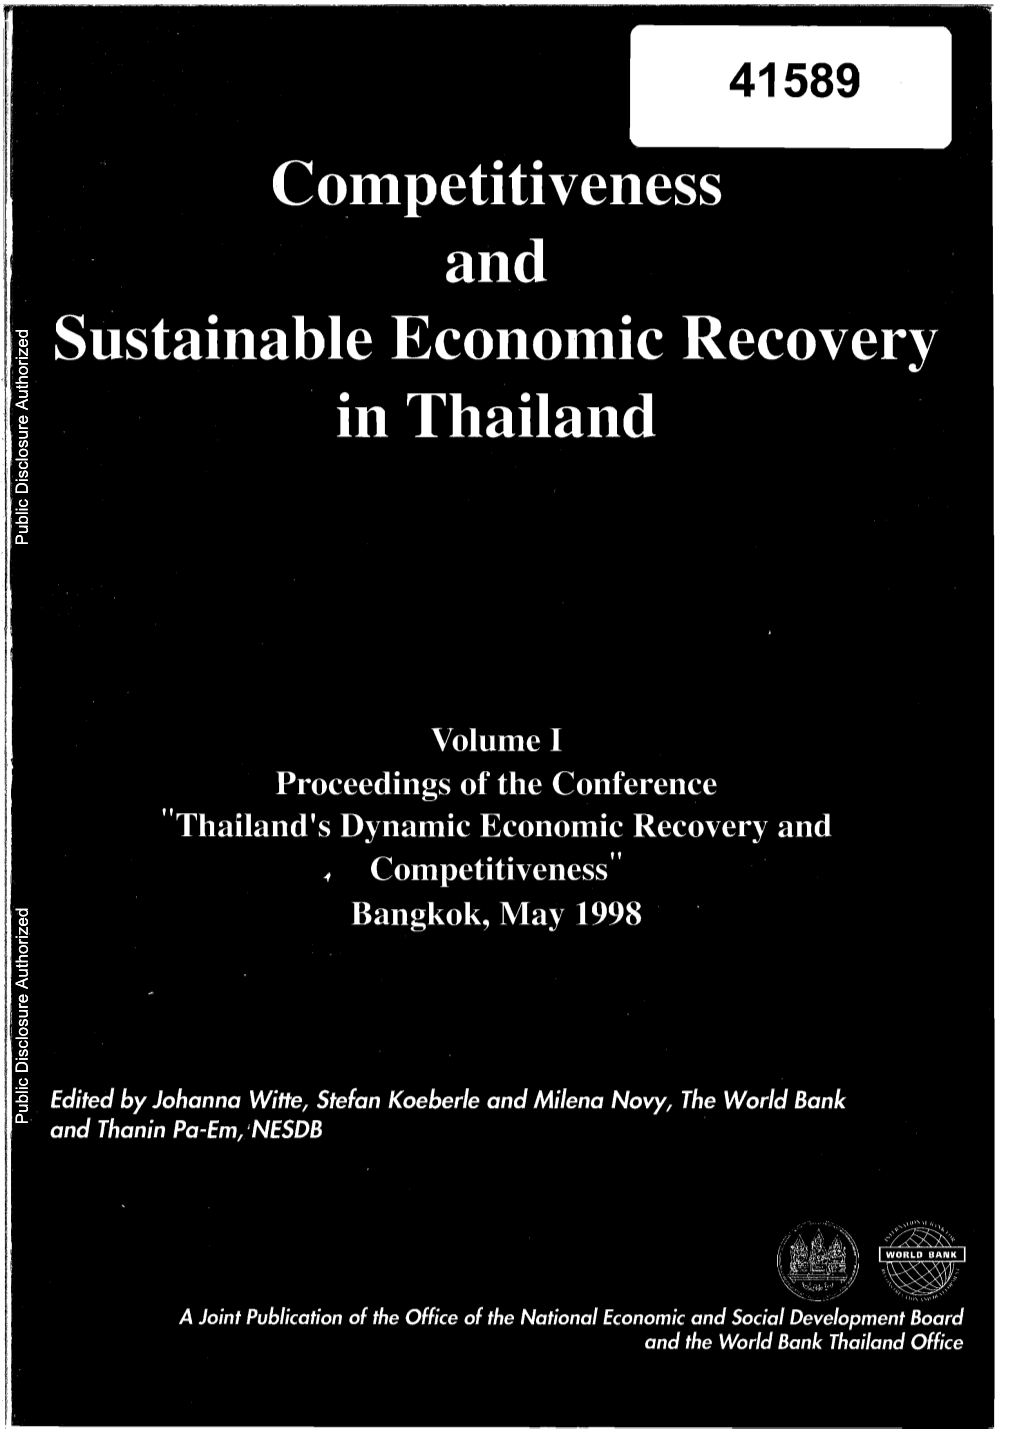 Competitiveness and Sustainable Economic Recovery in Thailand